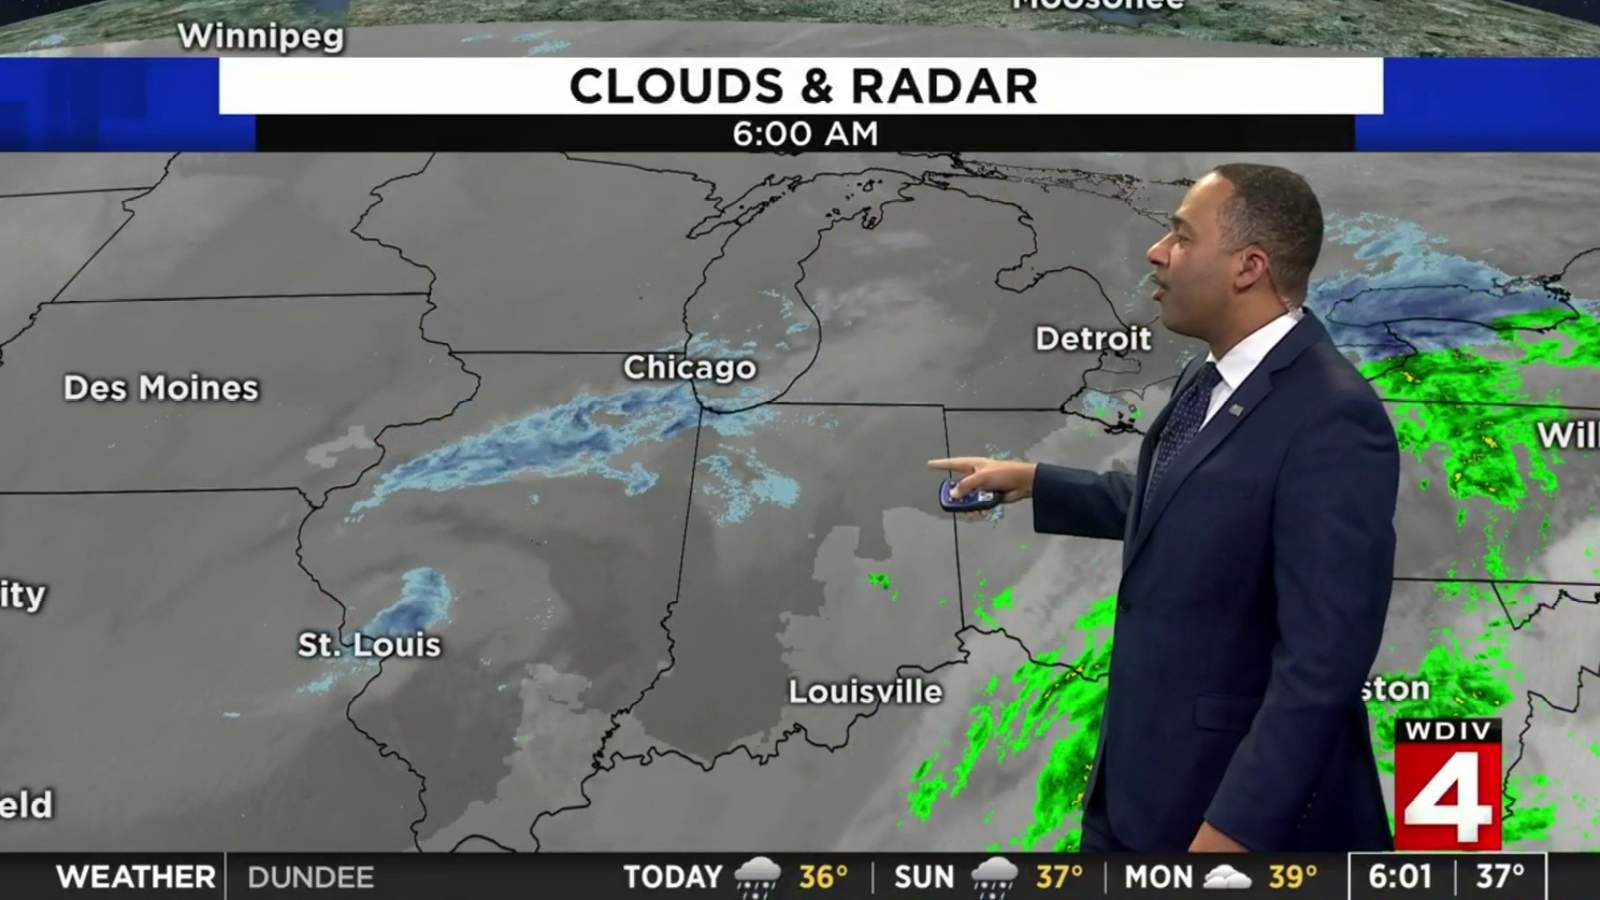 Detroit weather: Slippery Saturday morning, cloudy and chilly